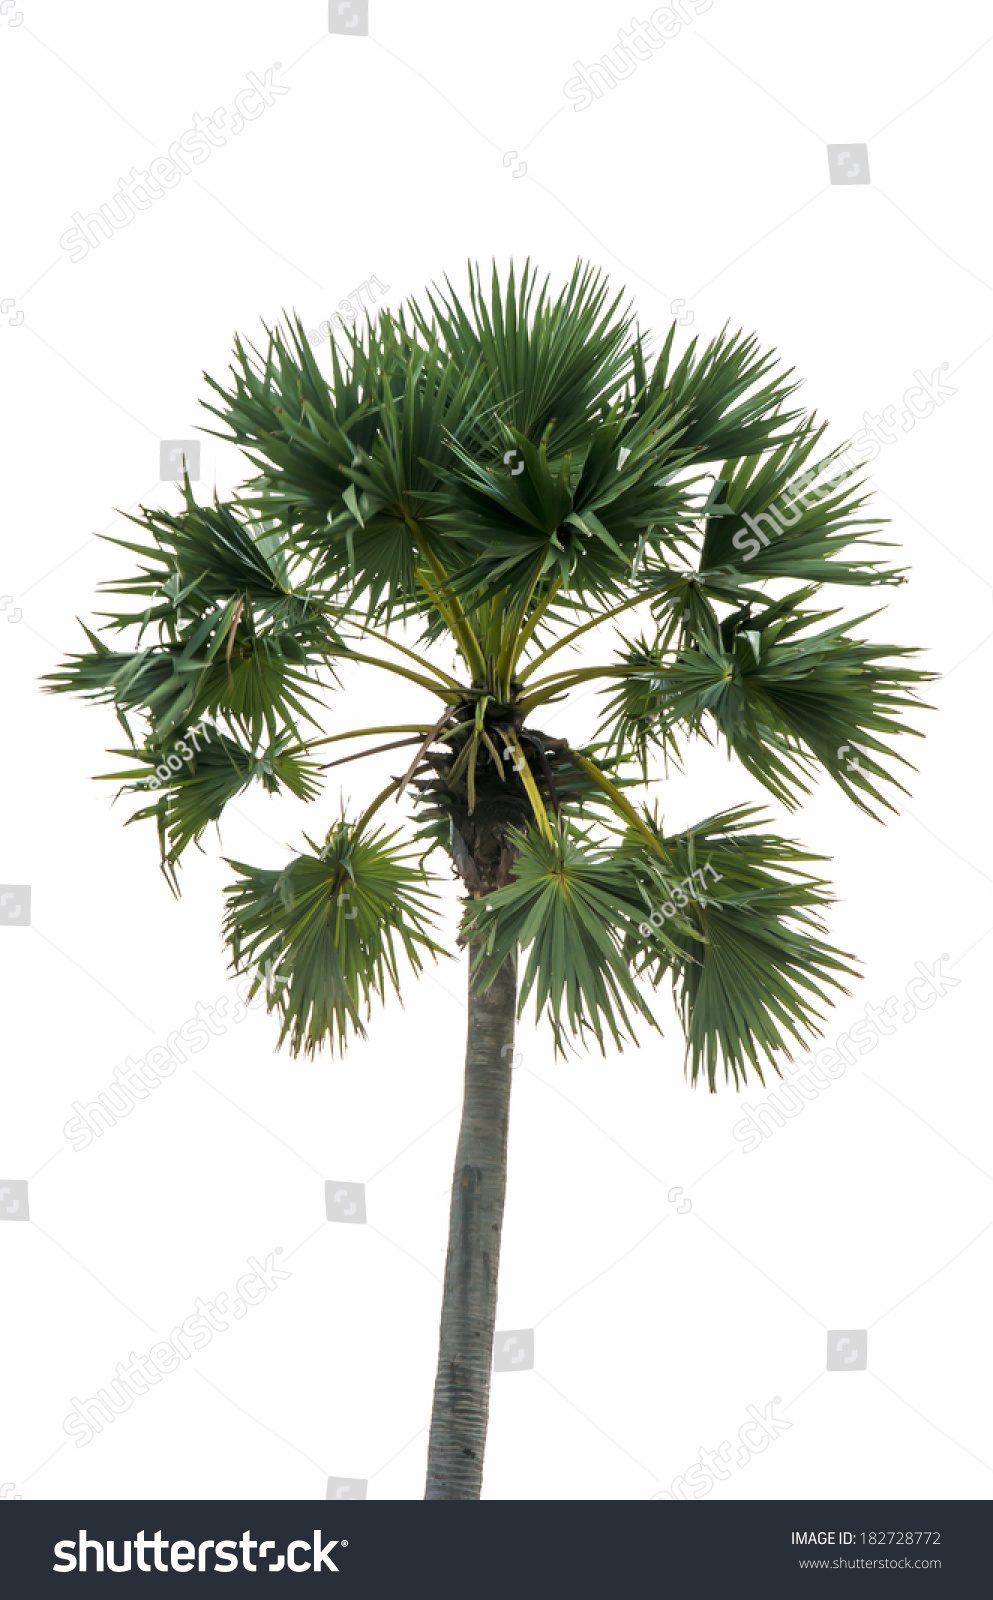 Palm Trees Isolated White Background Stock Photo 182728772 - Shutterstock